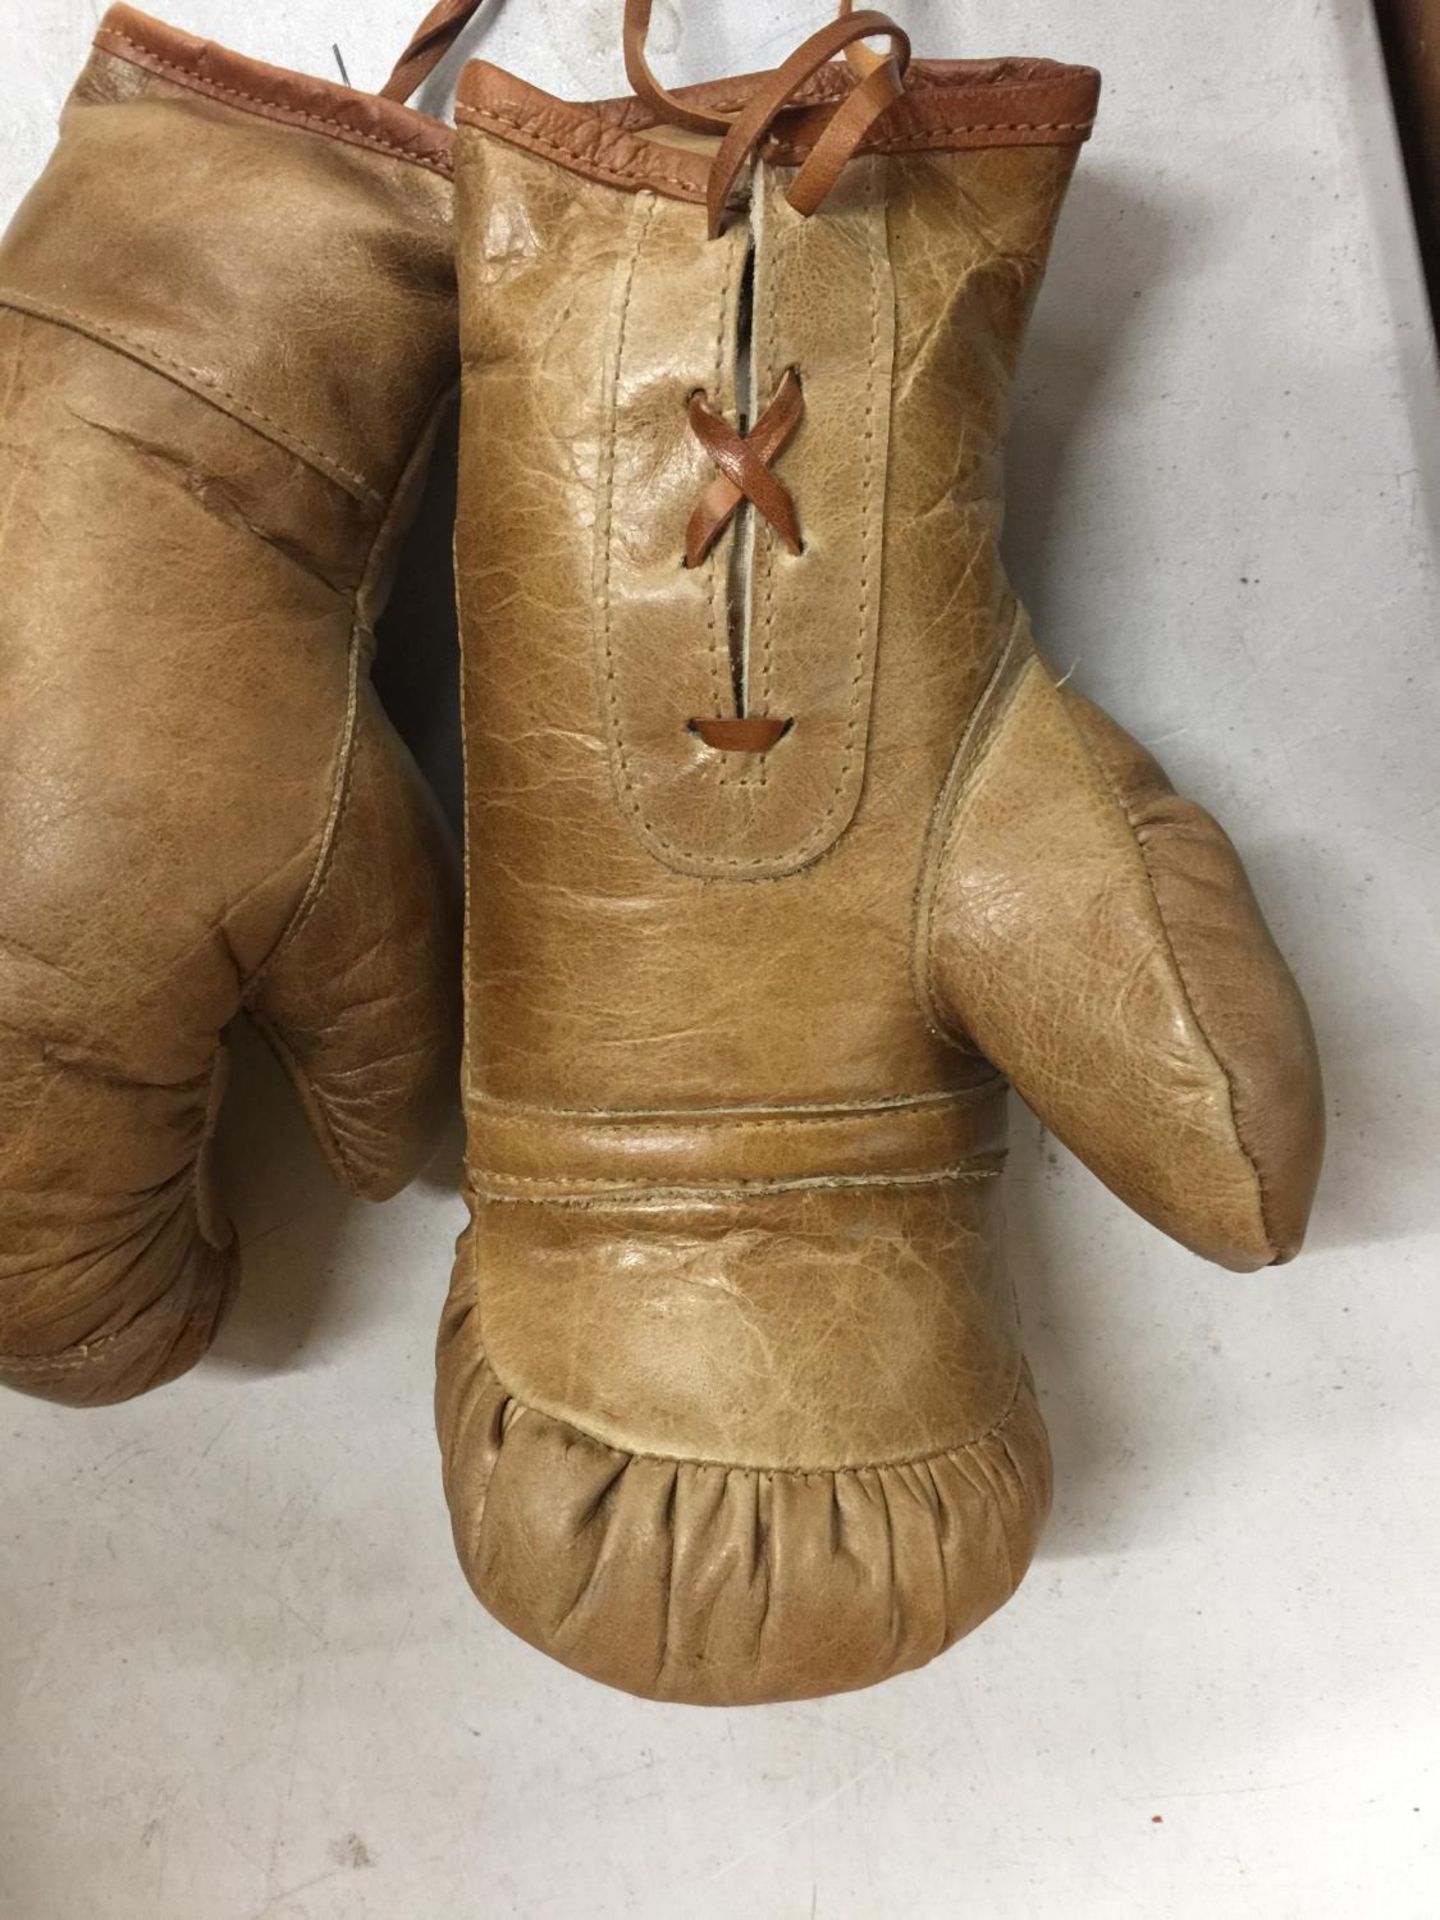 A PAIR OF VINTAGE BOXING GLOVES - Image 3 of 3